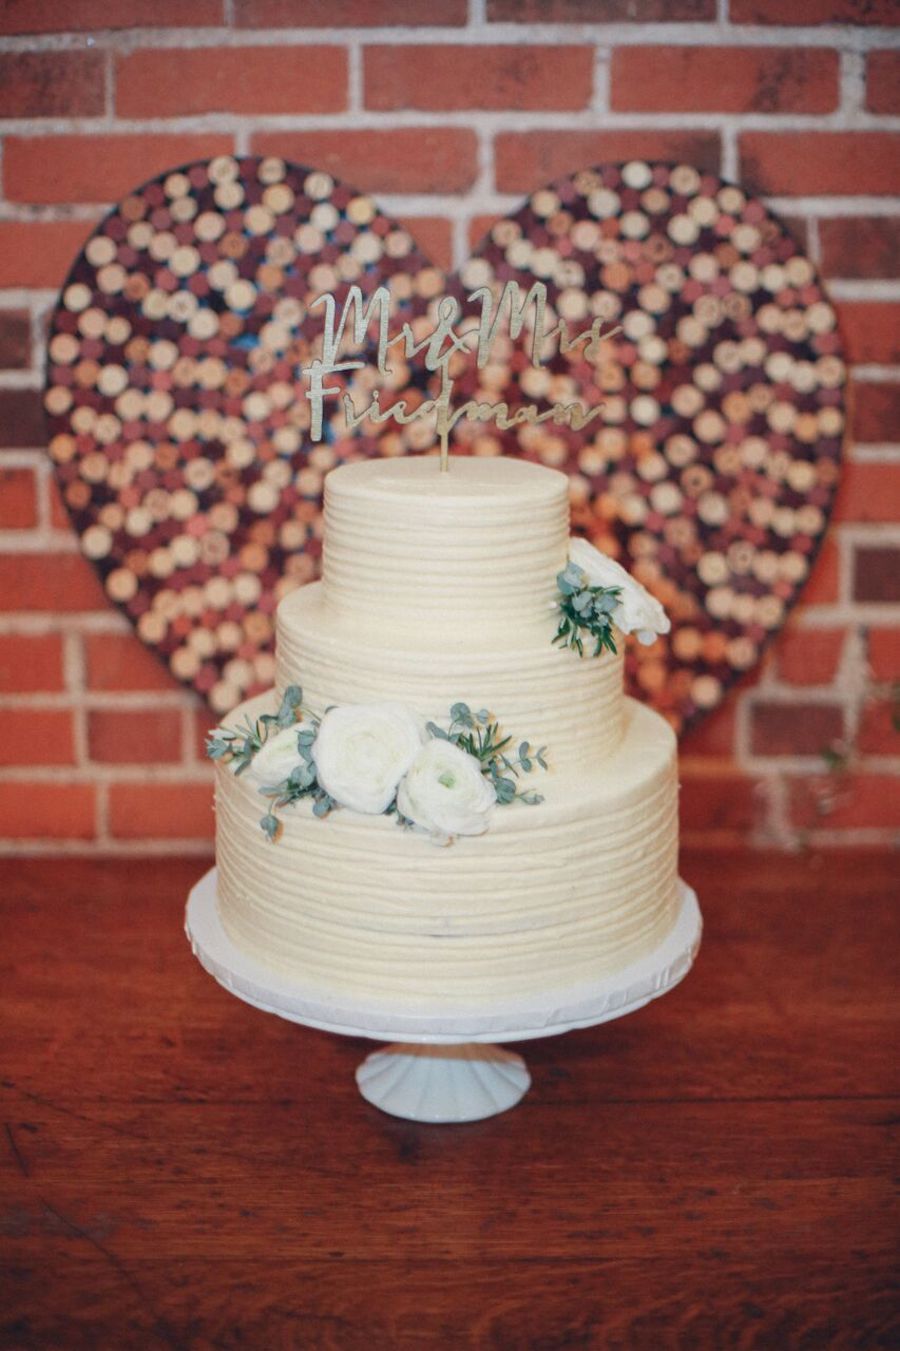 The wedding cake was a simple ivory one with fresh flowers and a calligraphy topper